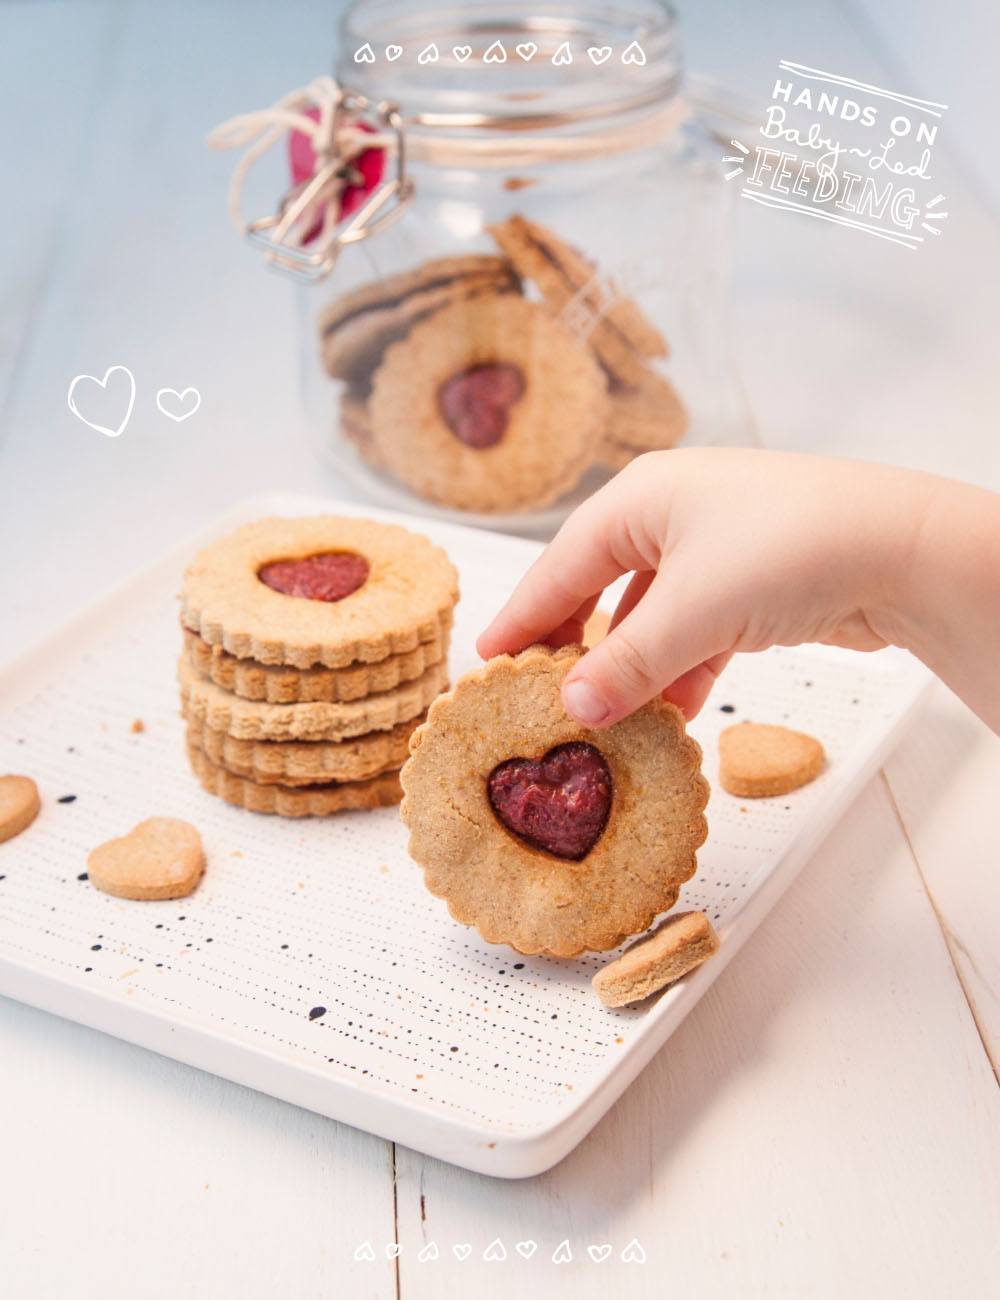 These hearty jam cookie are made with wholesome buckwheat and coconut flours. They are refined sugar free- sweetened only with with maple syrup and fresh raspberries. Add a few tablespoons of chia seeds for added protein, omega 3s , and antioxidants. #valentinesday #valentines #cookies #raspberries #babyledweaning @https://www.pinterest.com/babyledfeeding